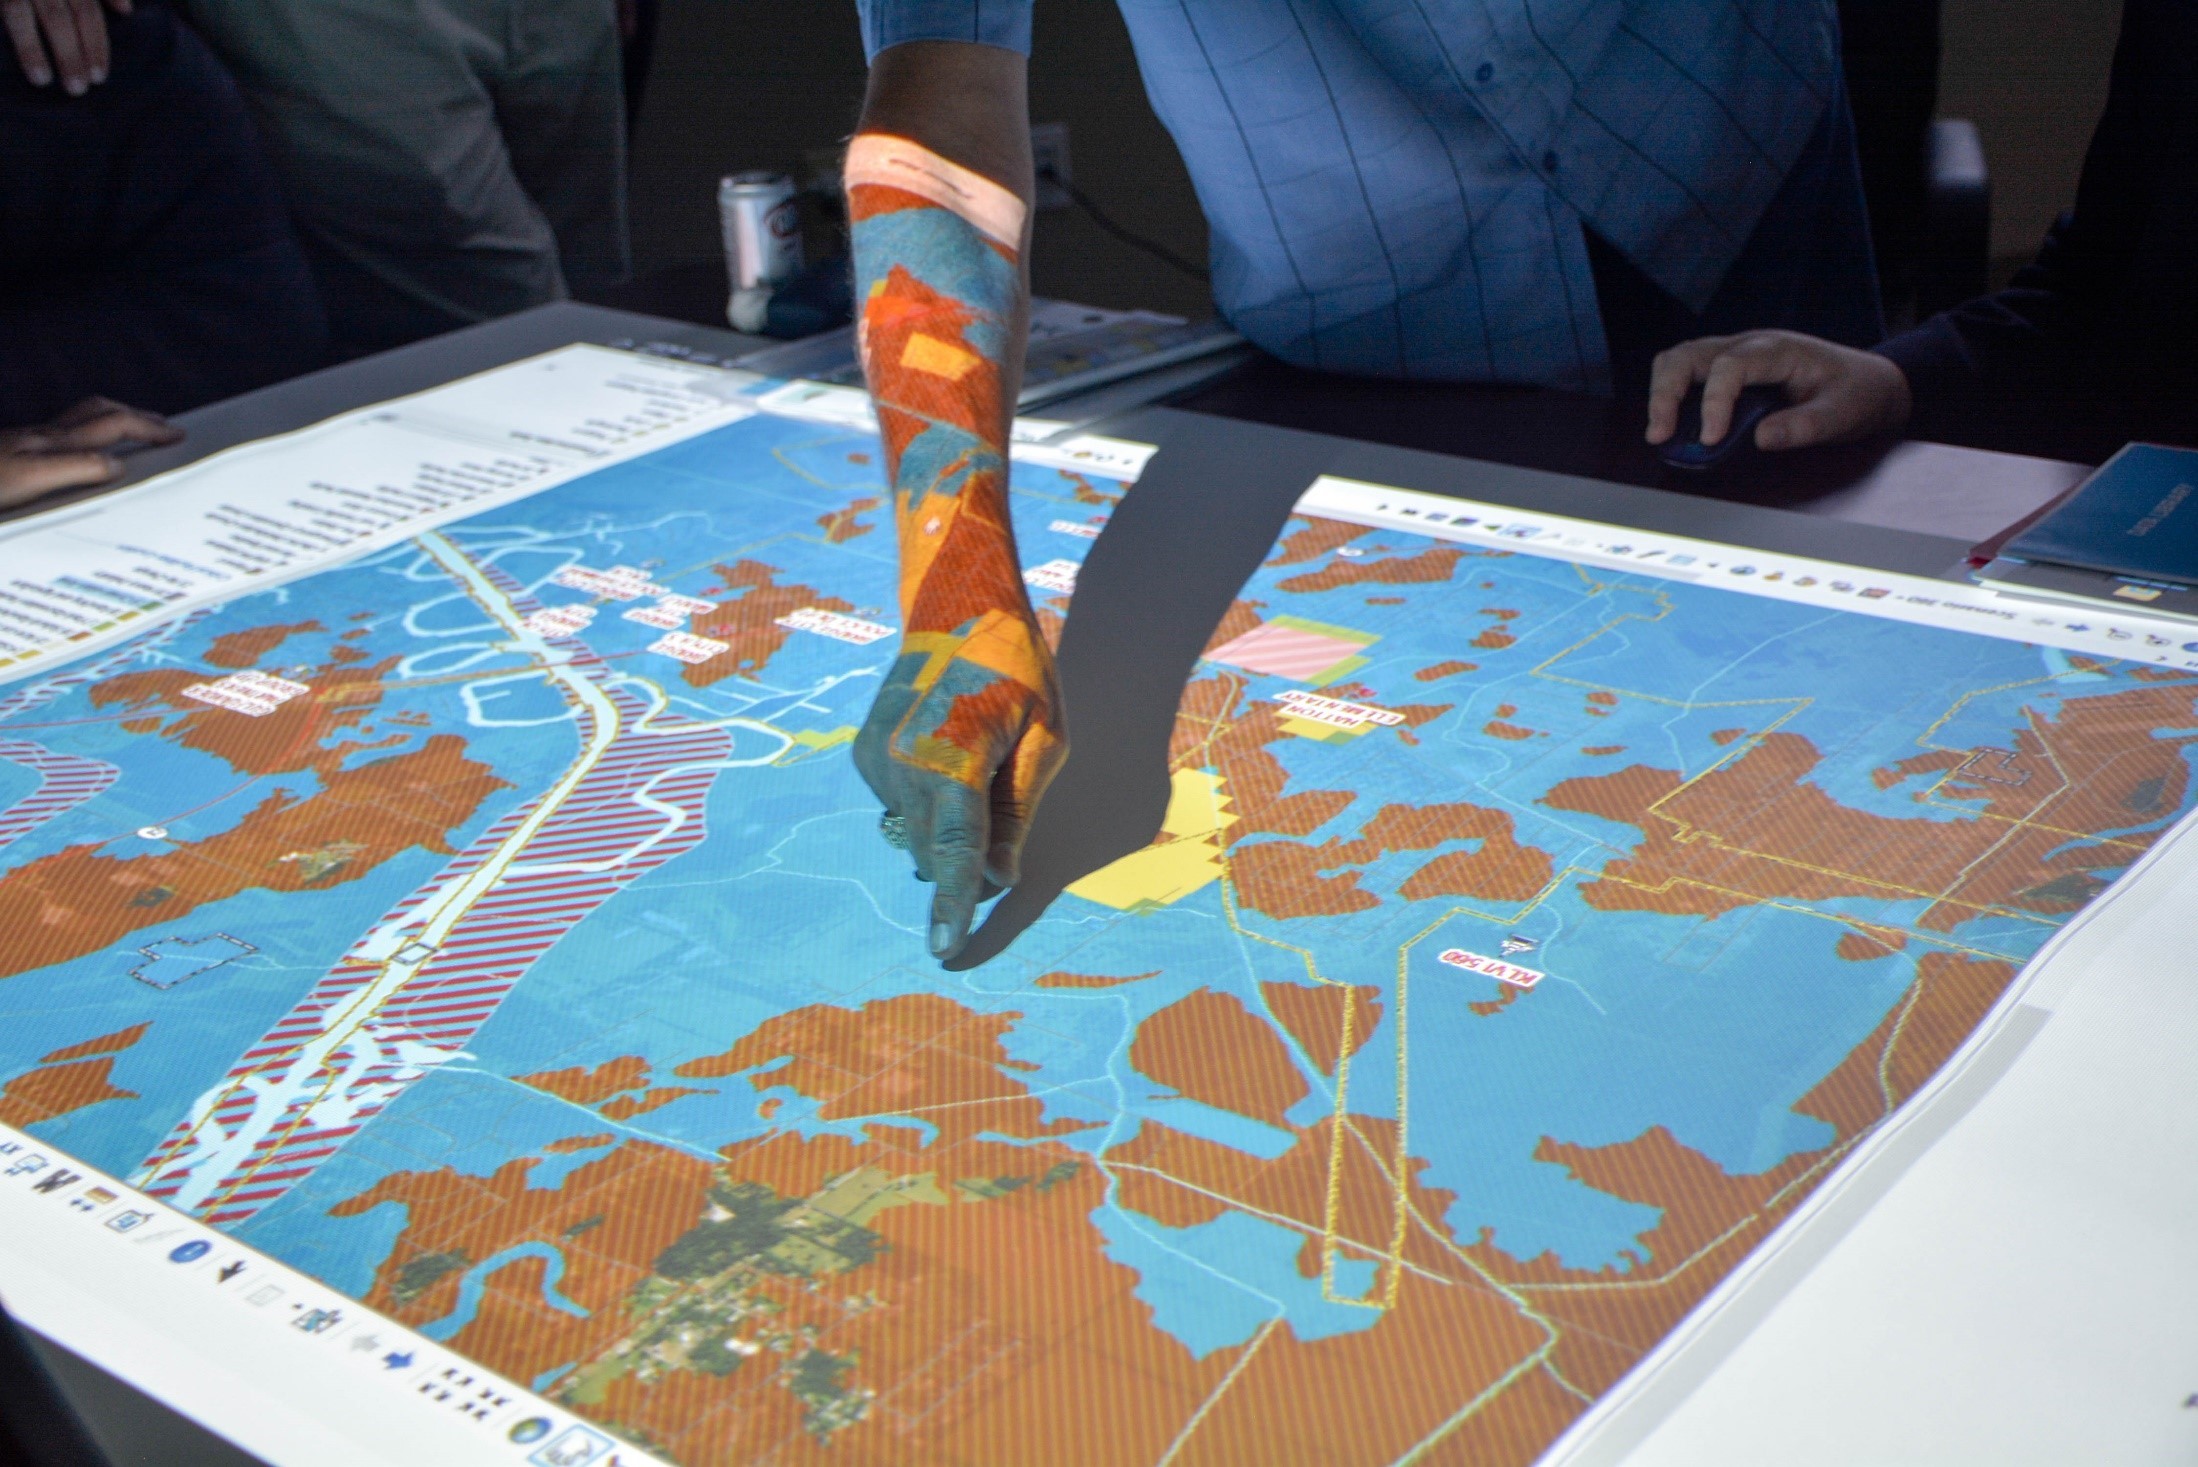 A close-up of CHARM’s interactive tabletop mapping application.